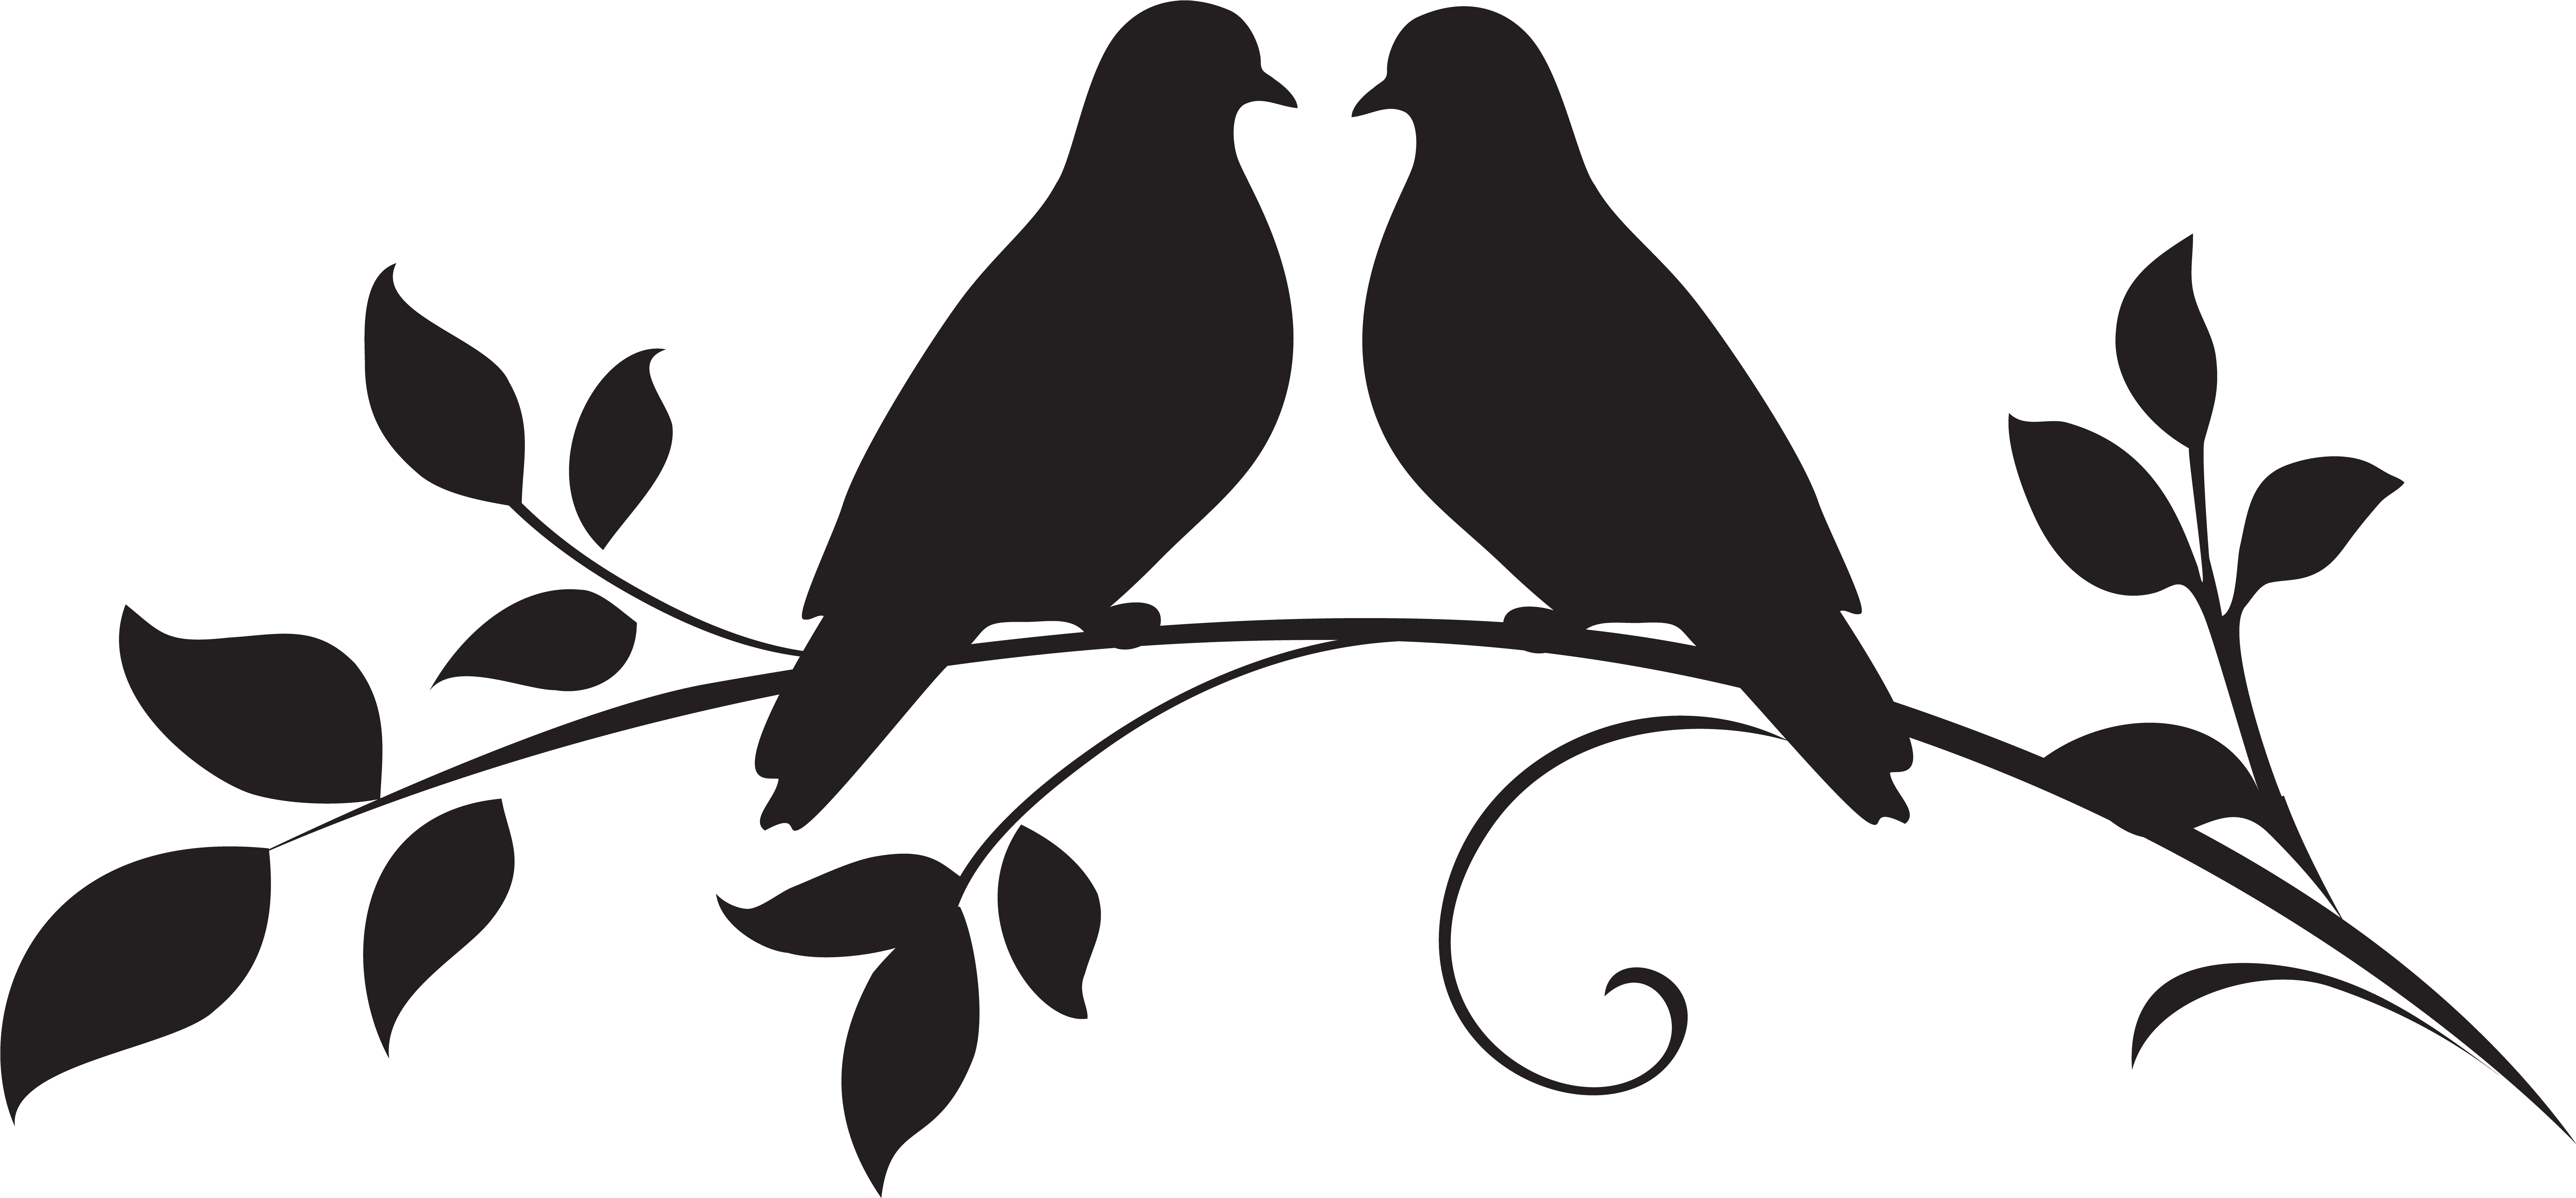 love birds clipart black and white
